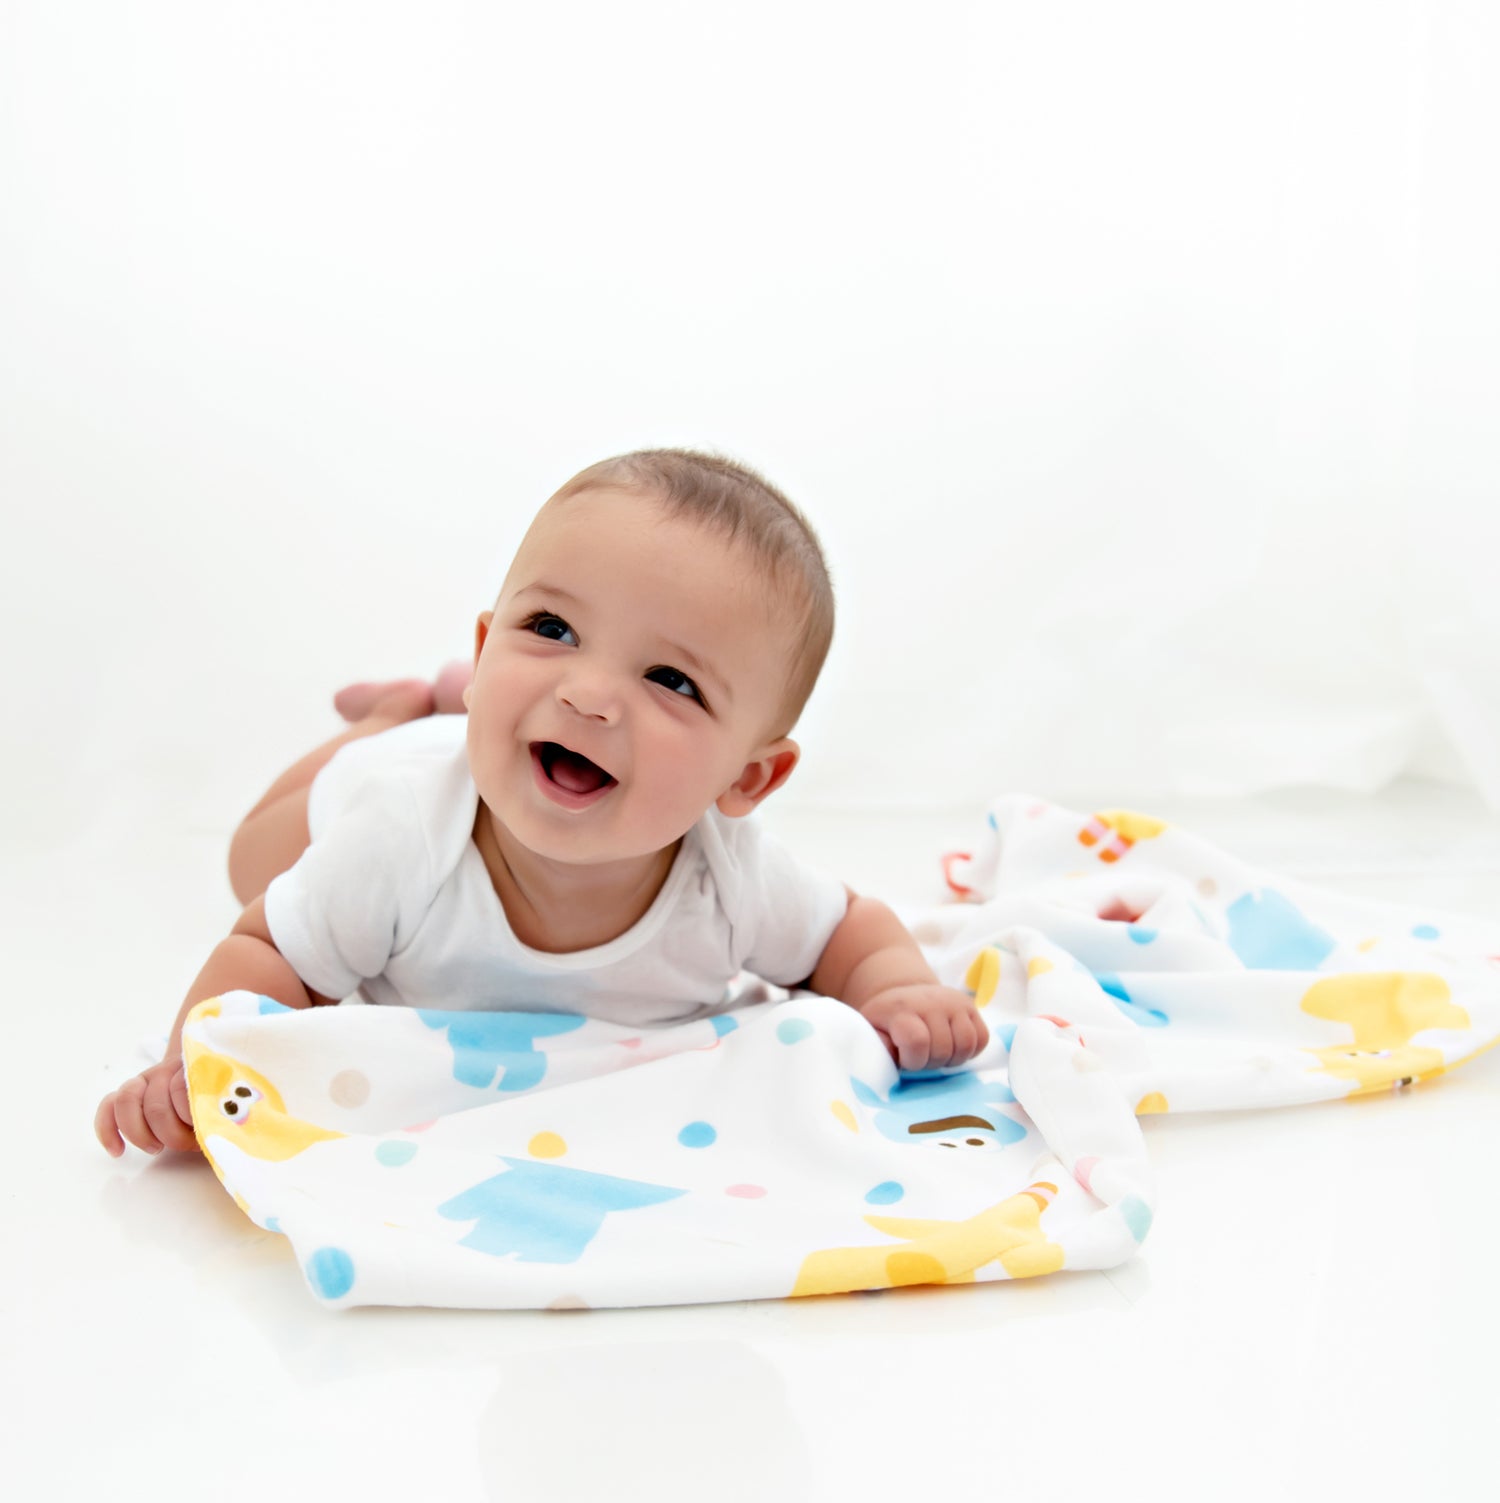 Wrap Them in Love: Personalized Blankets as the Perfect Newborn Gift